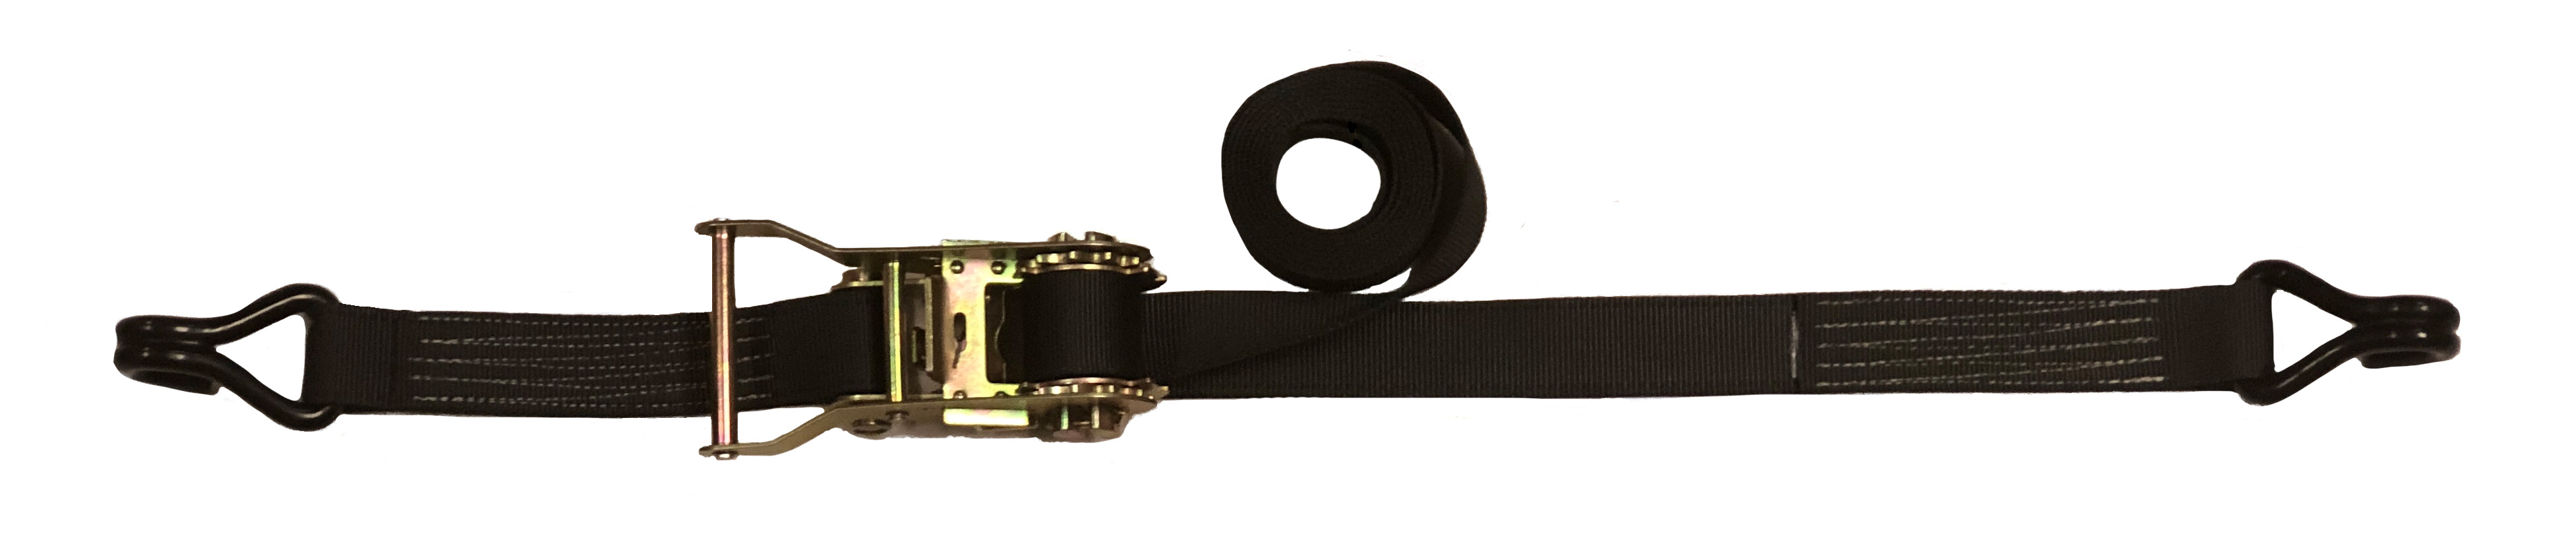 Heavy Duty SPIN FREE Ratchet Straps & Tie Downs